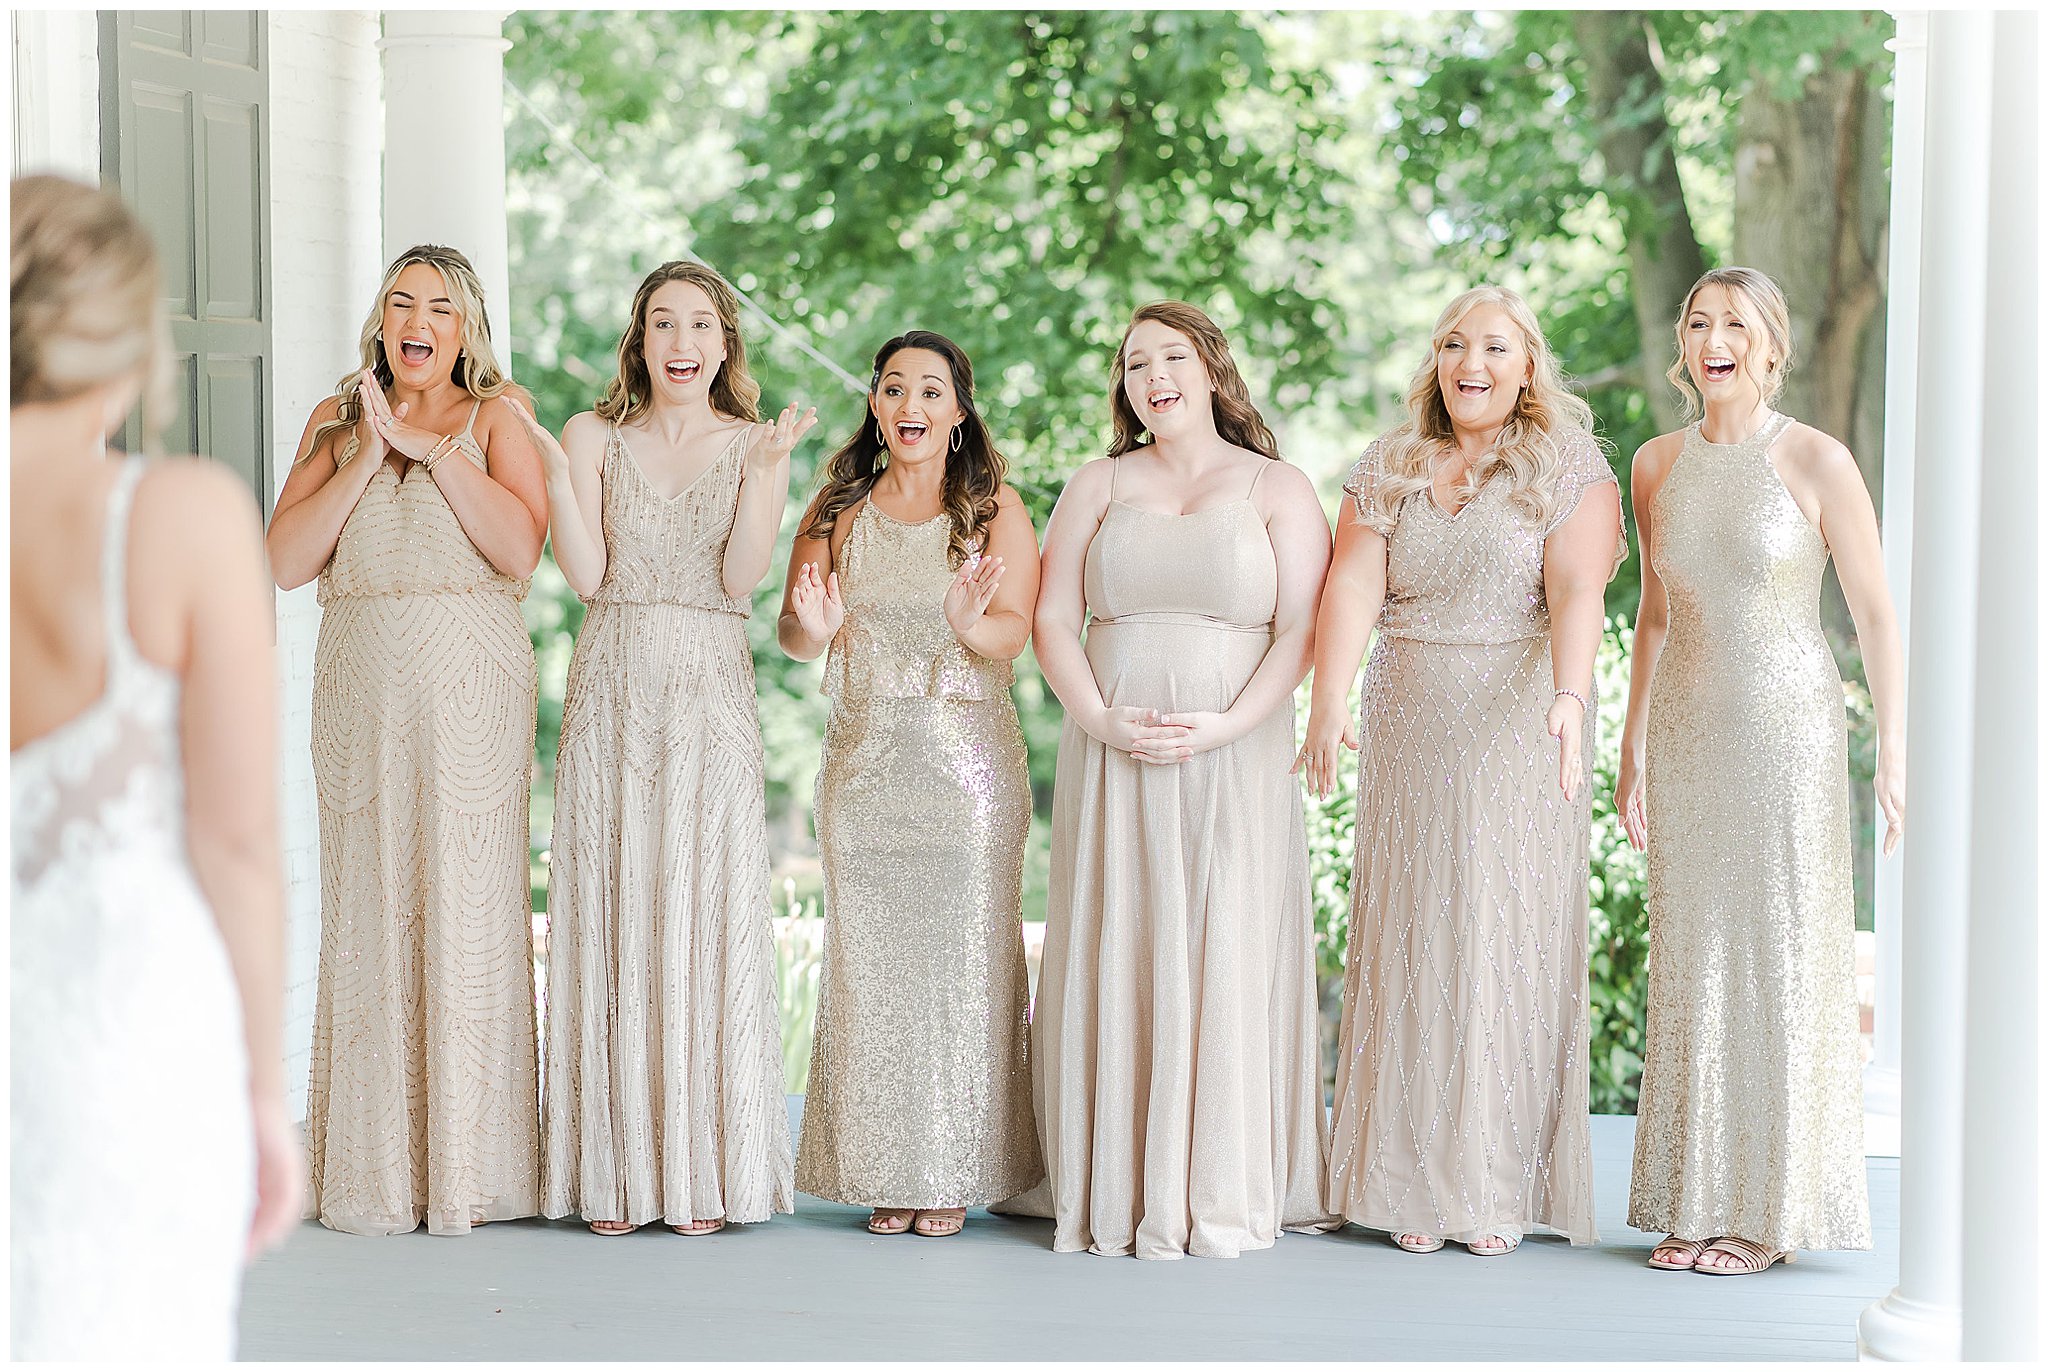 Historic Ashland Wedding | Historic Ashland Wedding Photographer | Wrightsville PA | Wrightsville PA Wedding | Wrightsville PA Wedding Venue | First look | Bridesmaids First Look